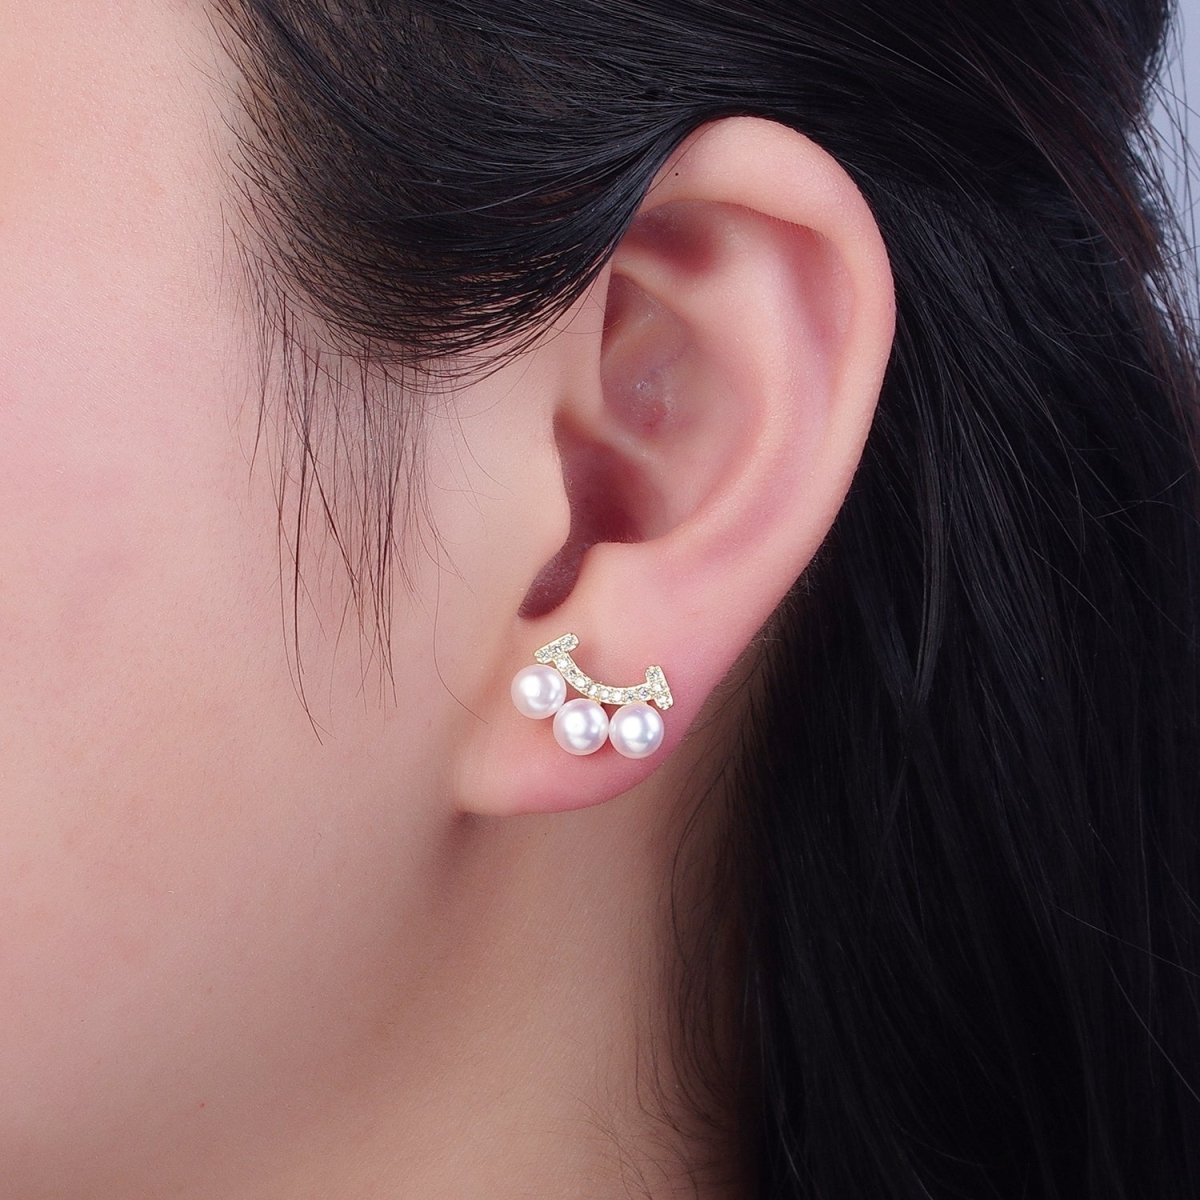 OS Three White Pearl Stud Earring with Gold Pave Smile for Wedding Jewelry T-528 - DLUXCA